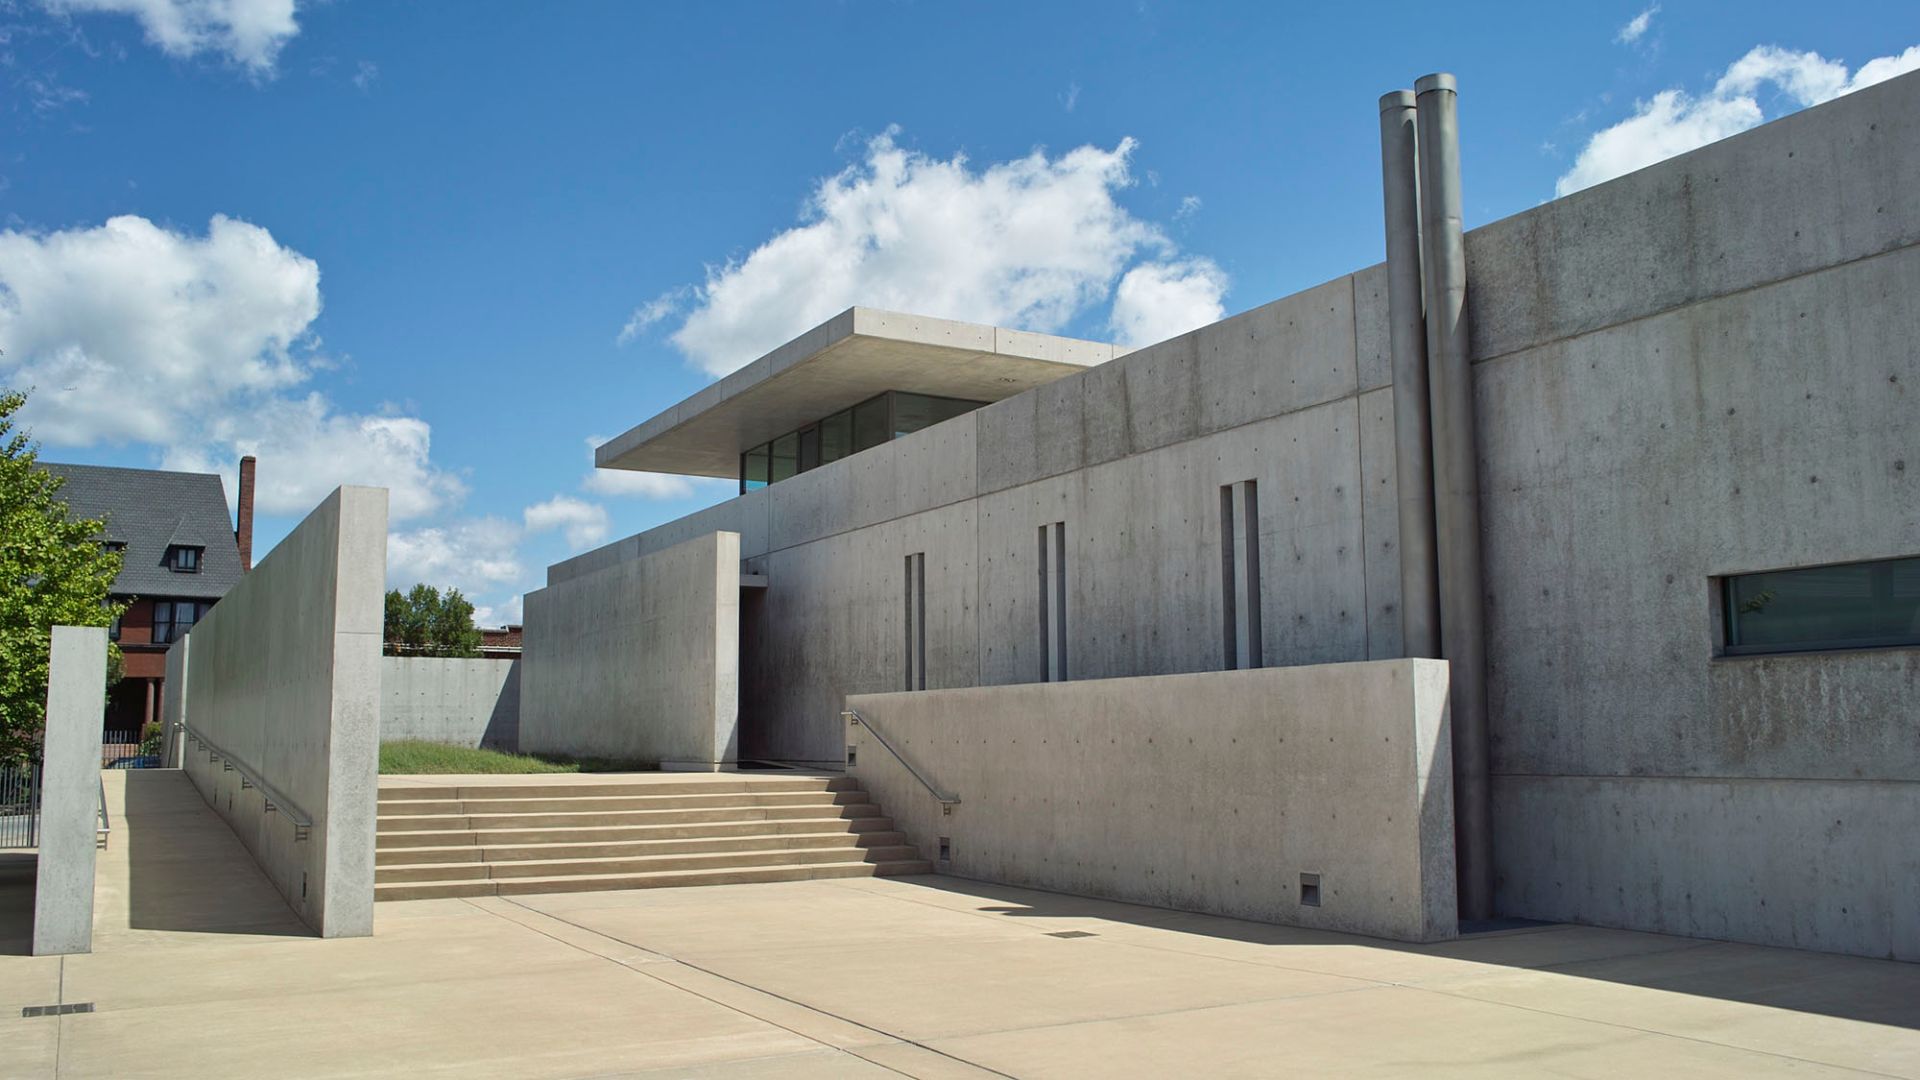 The Pulitzer Arts Foundation houses contemporary art in a modern concrete structure.